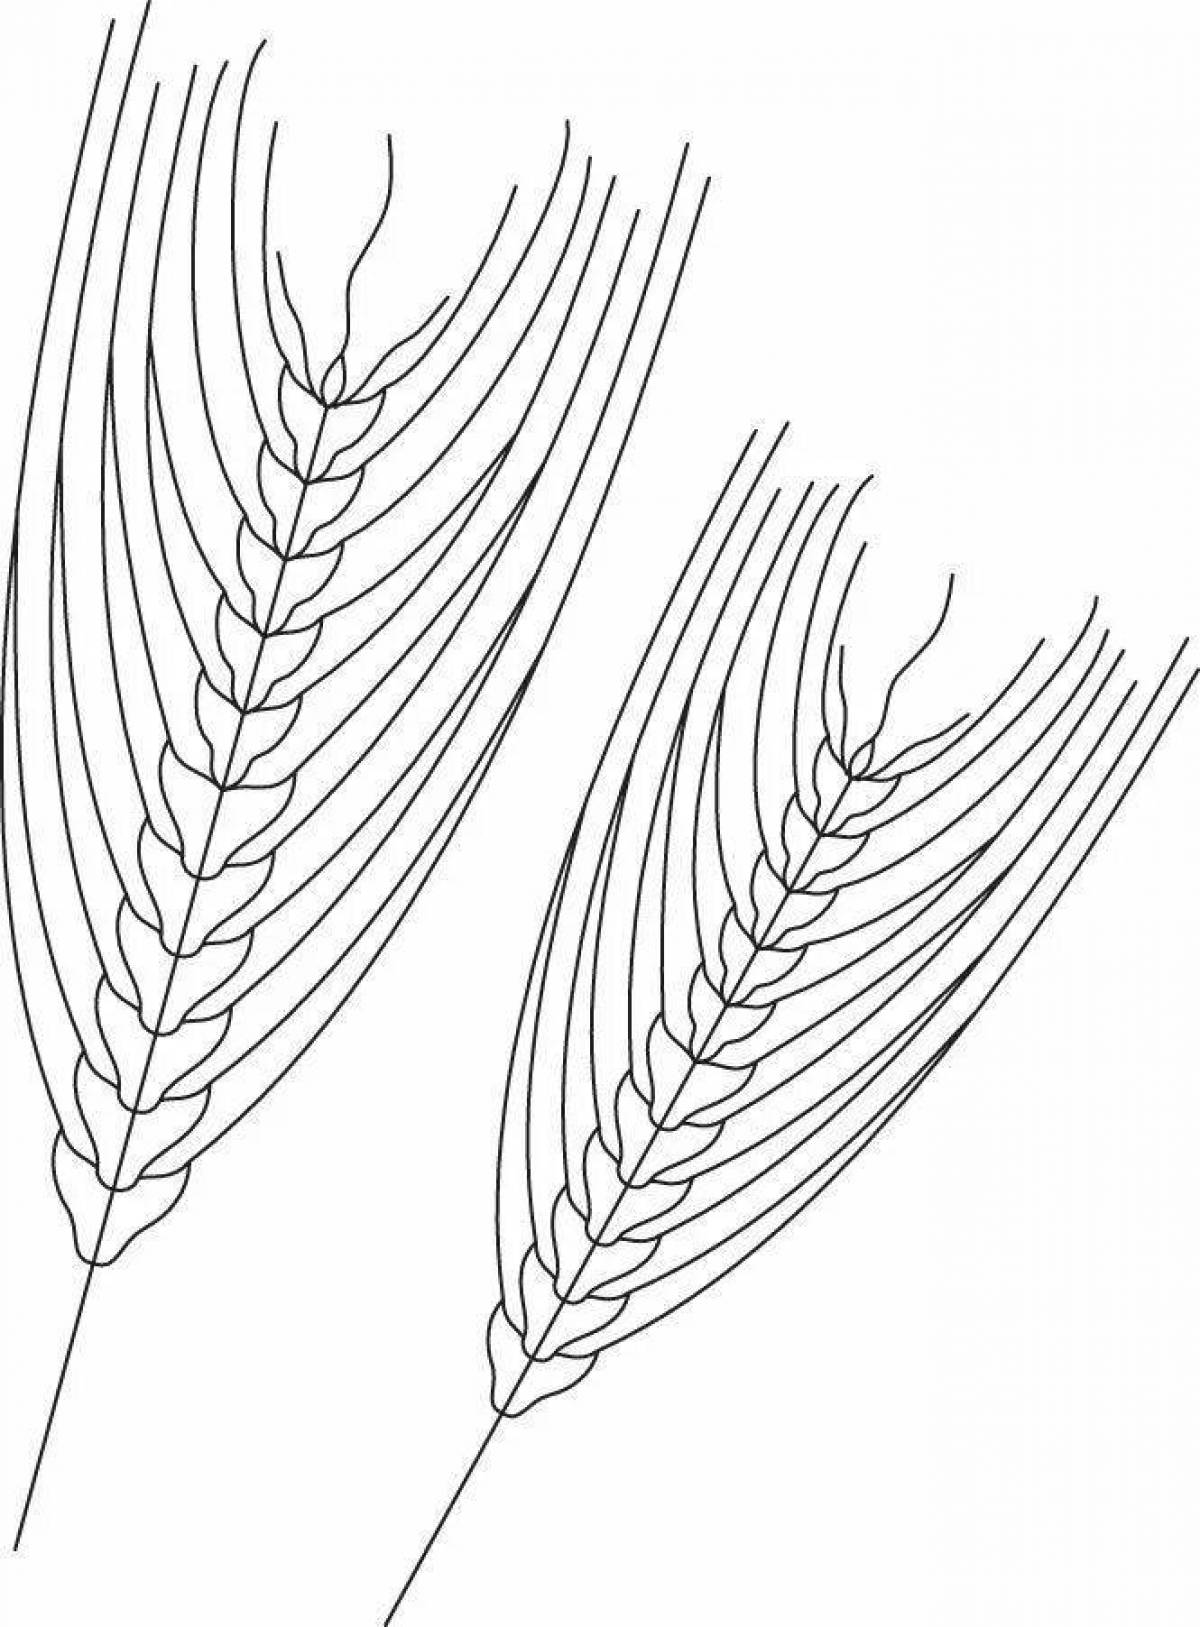 Coloring spikelet